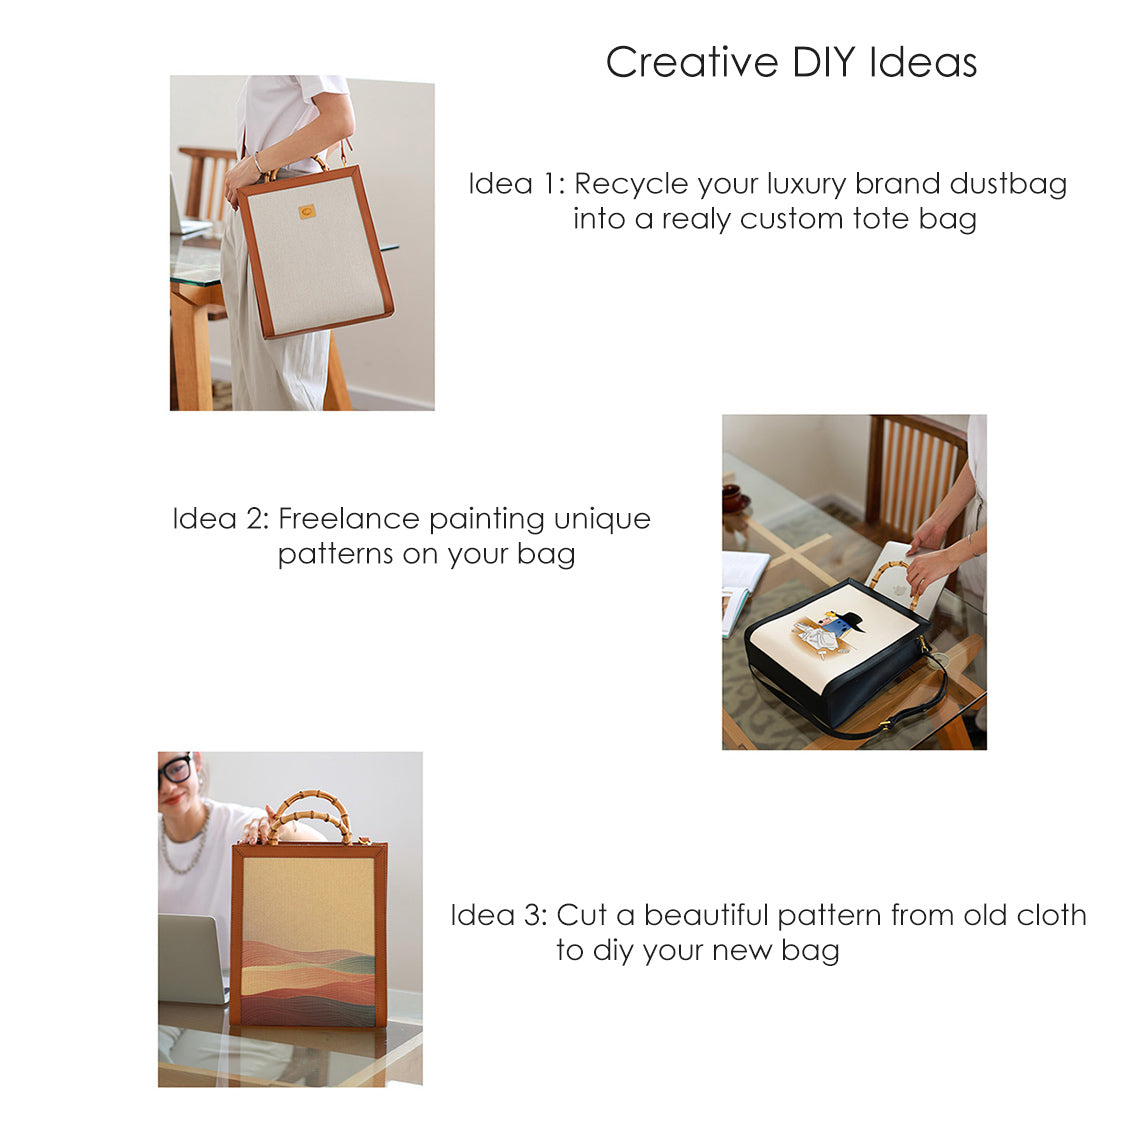 DIY Bag Making Ideas | How to Make a Bag from Old Clothes/Luxury Brand Dust Bags - POPSEWING™